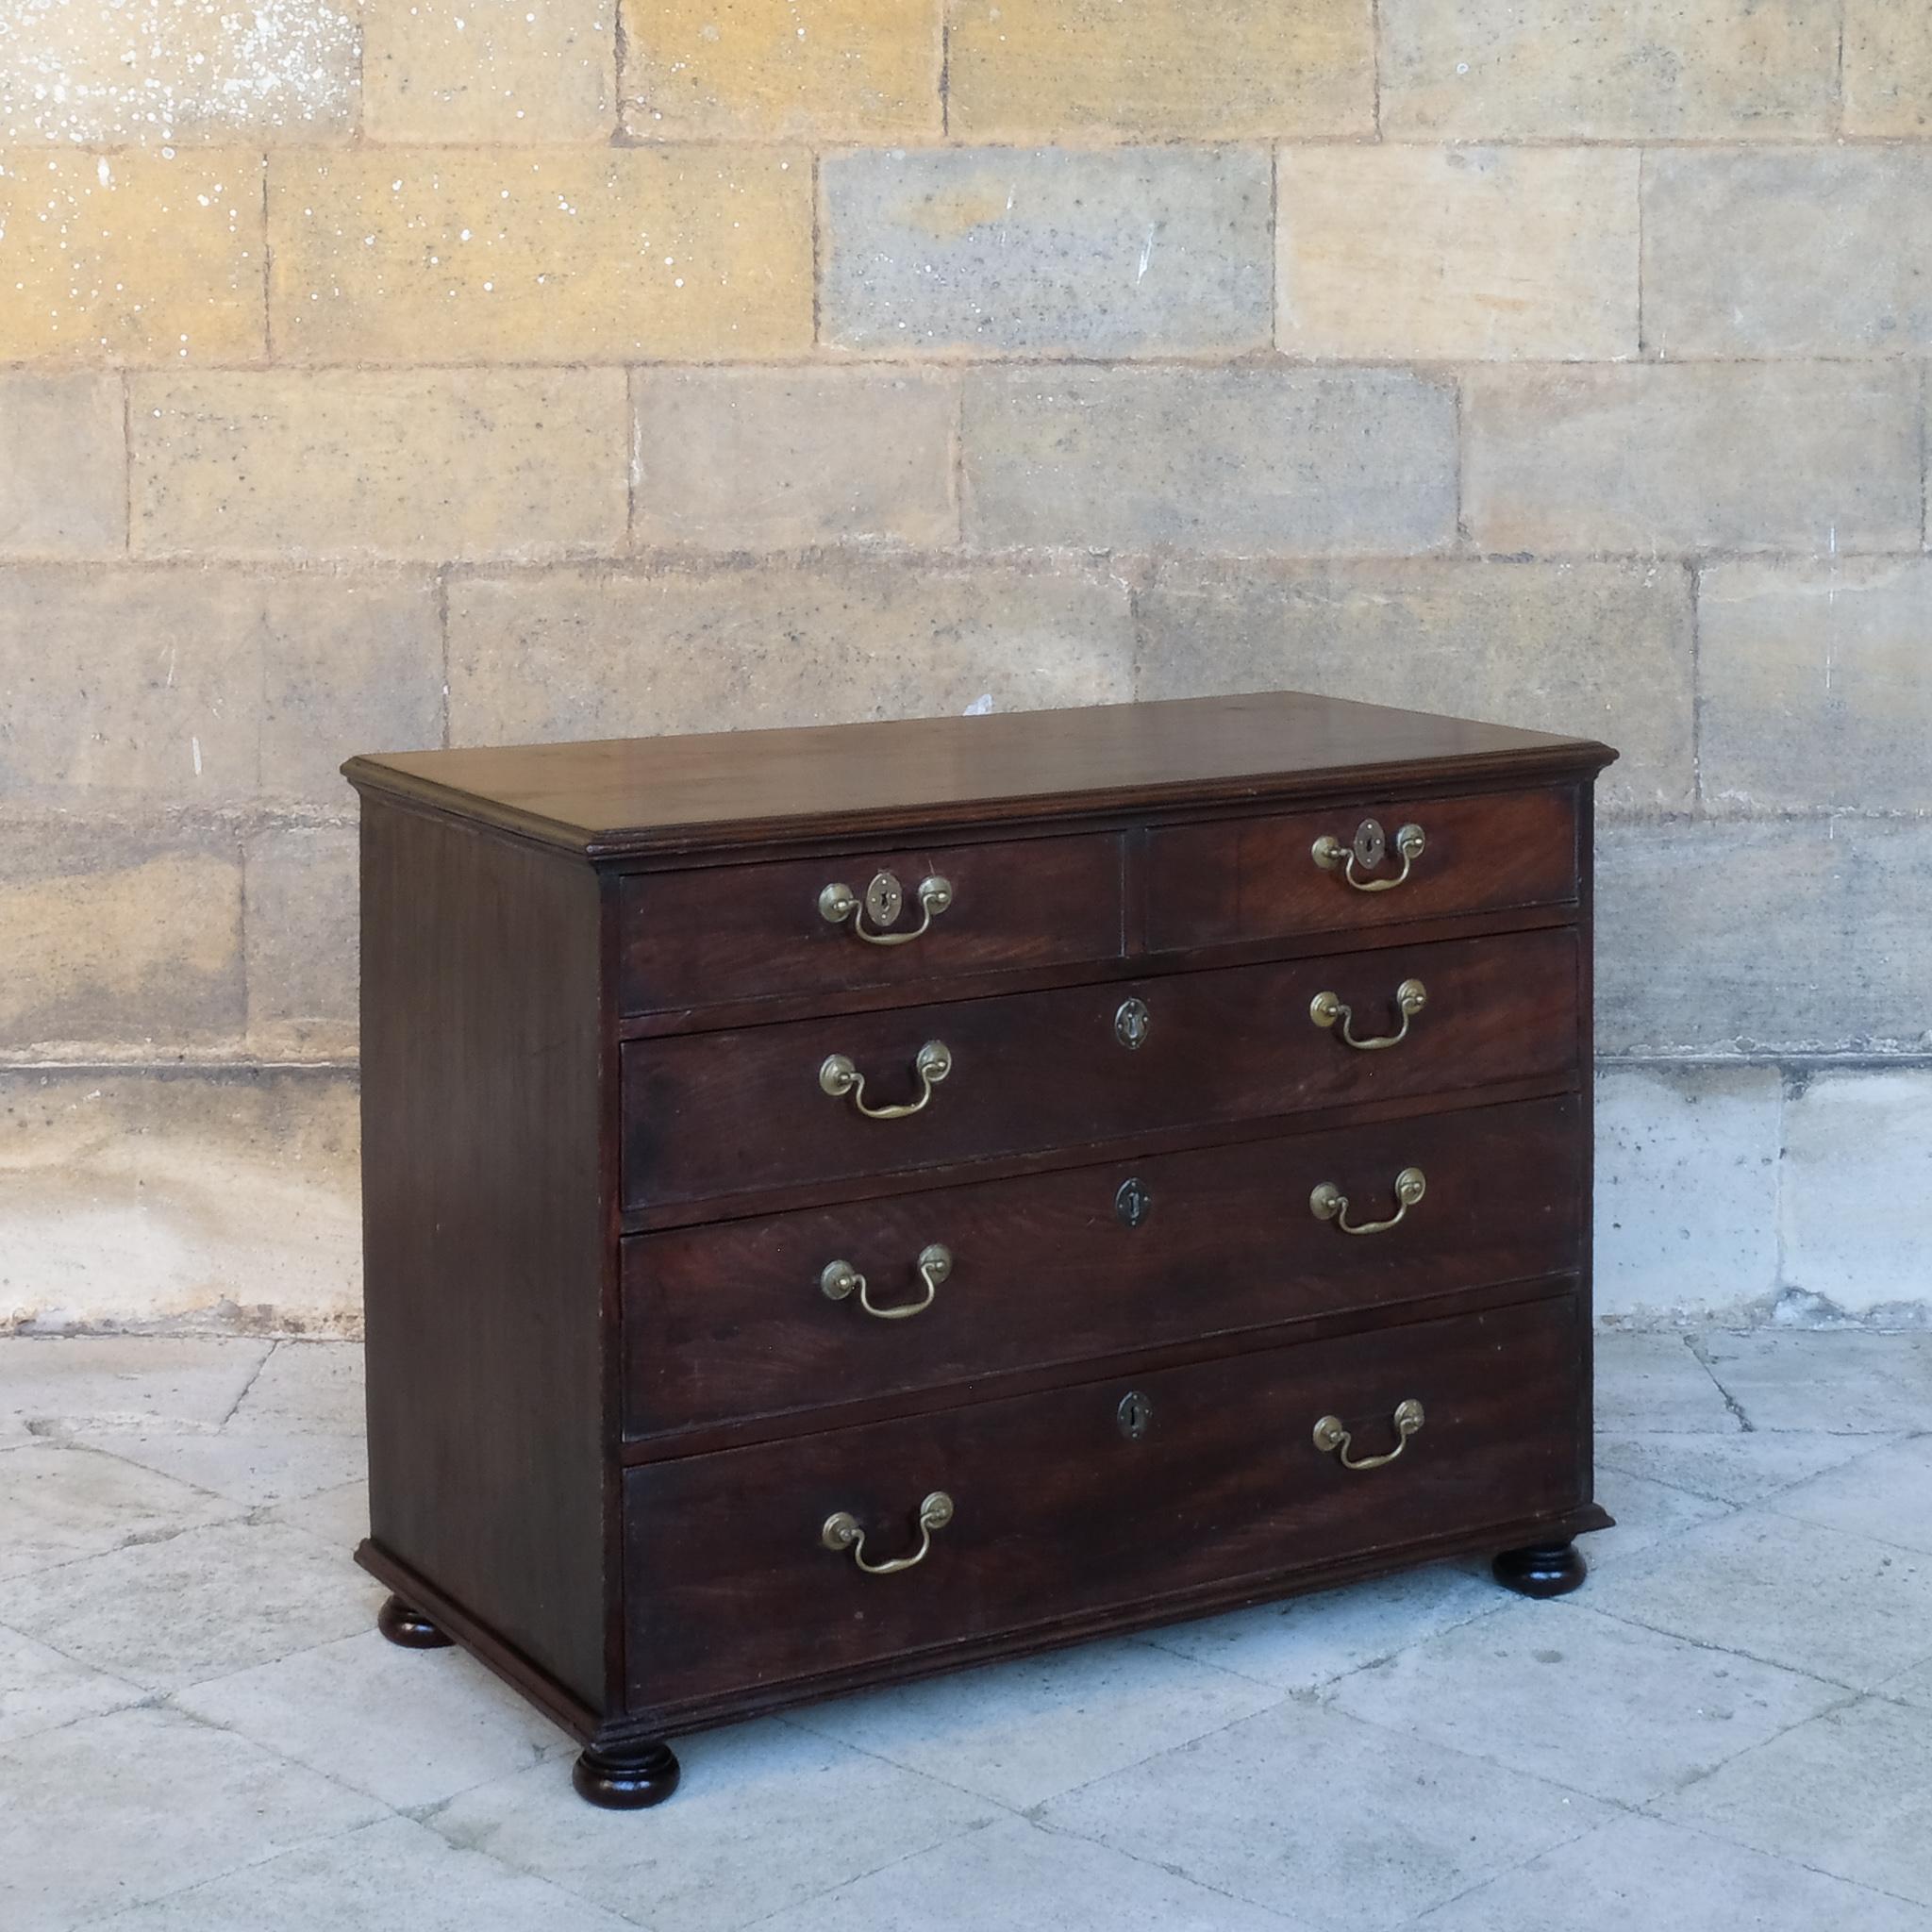 British 18th Century Mahogany Chest Of Drawers For Sale